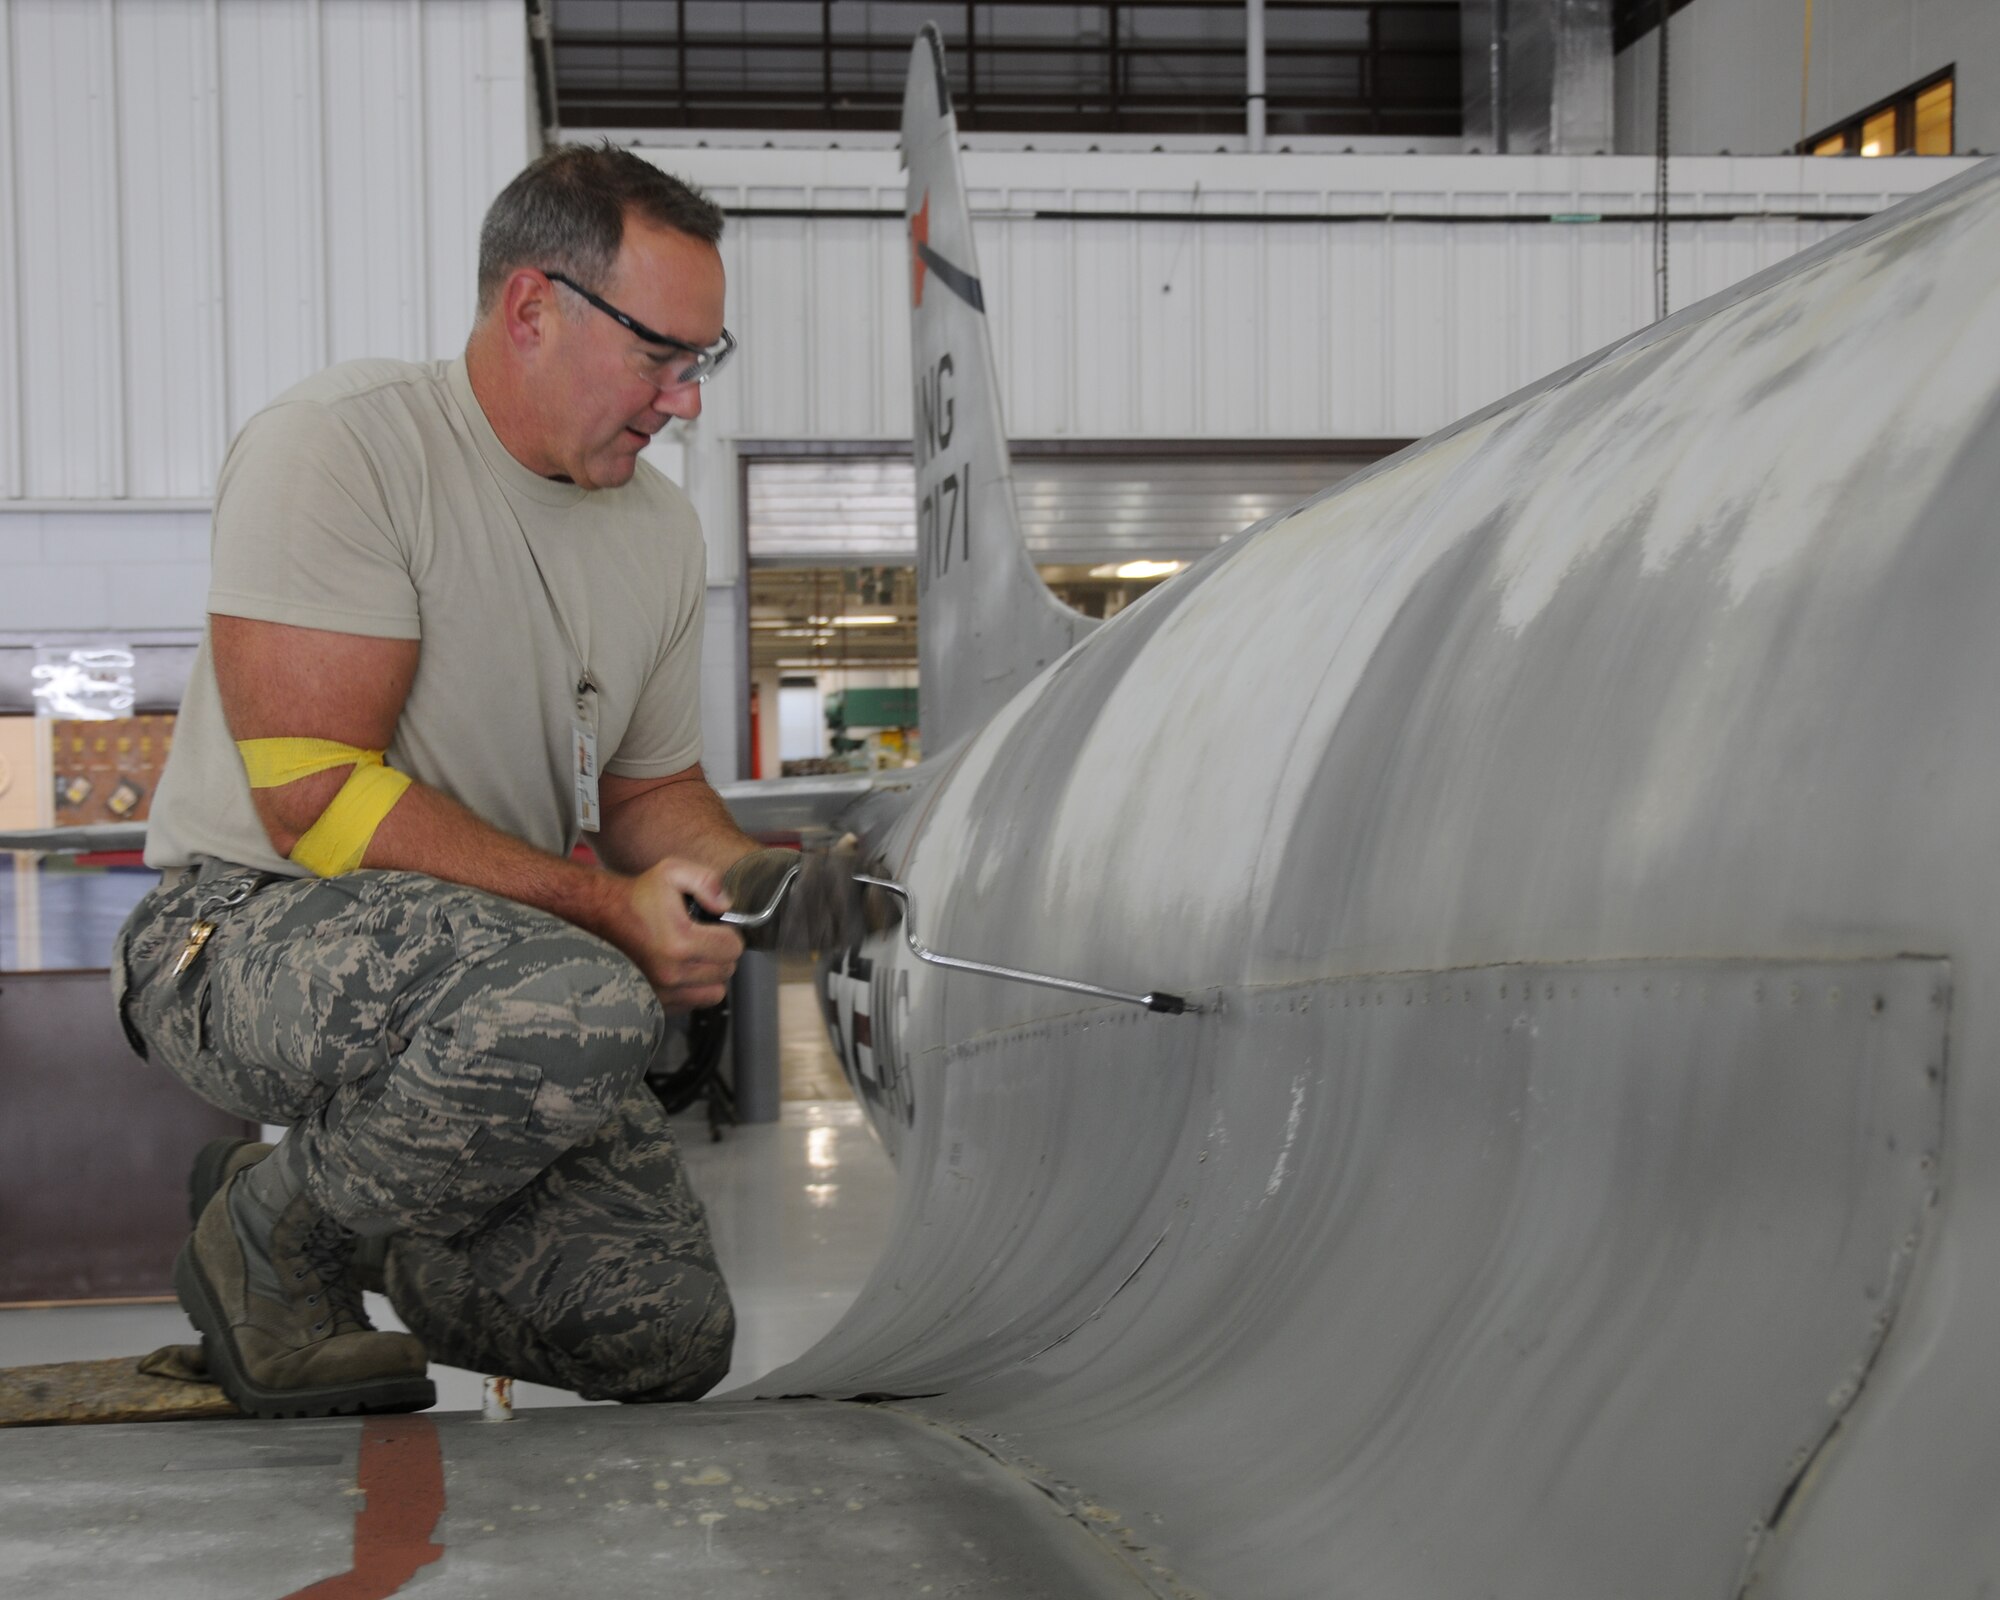 Senior Master Sgt. Don Leget, 185th Air Refueling Wing Fabrication Element, Sioux City, Iowa, removes a wing fairing from an F-80 in an early step of the restoration process. The F-80C was flown at the 185th from July 1953 through 1955 and is being restored as a static display to showcase the unit's history.